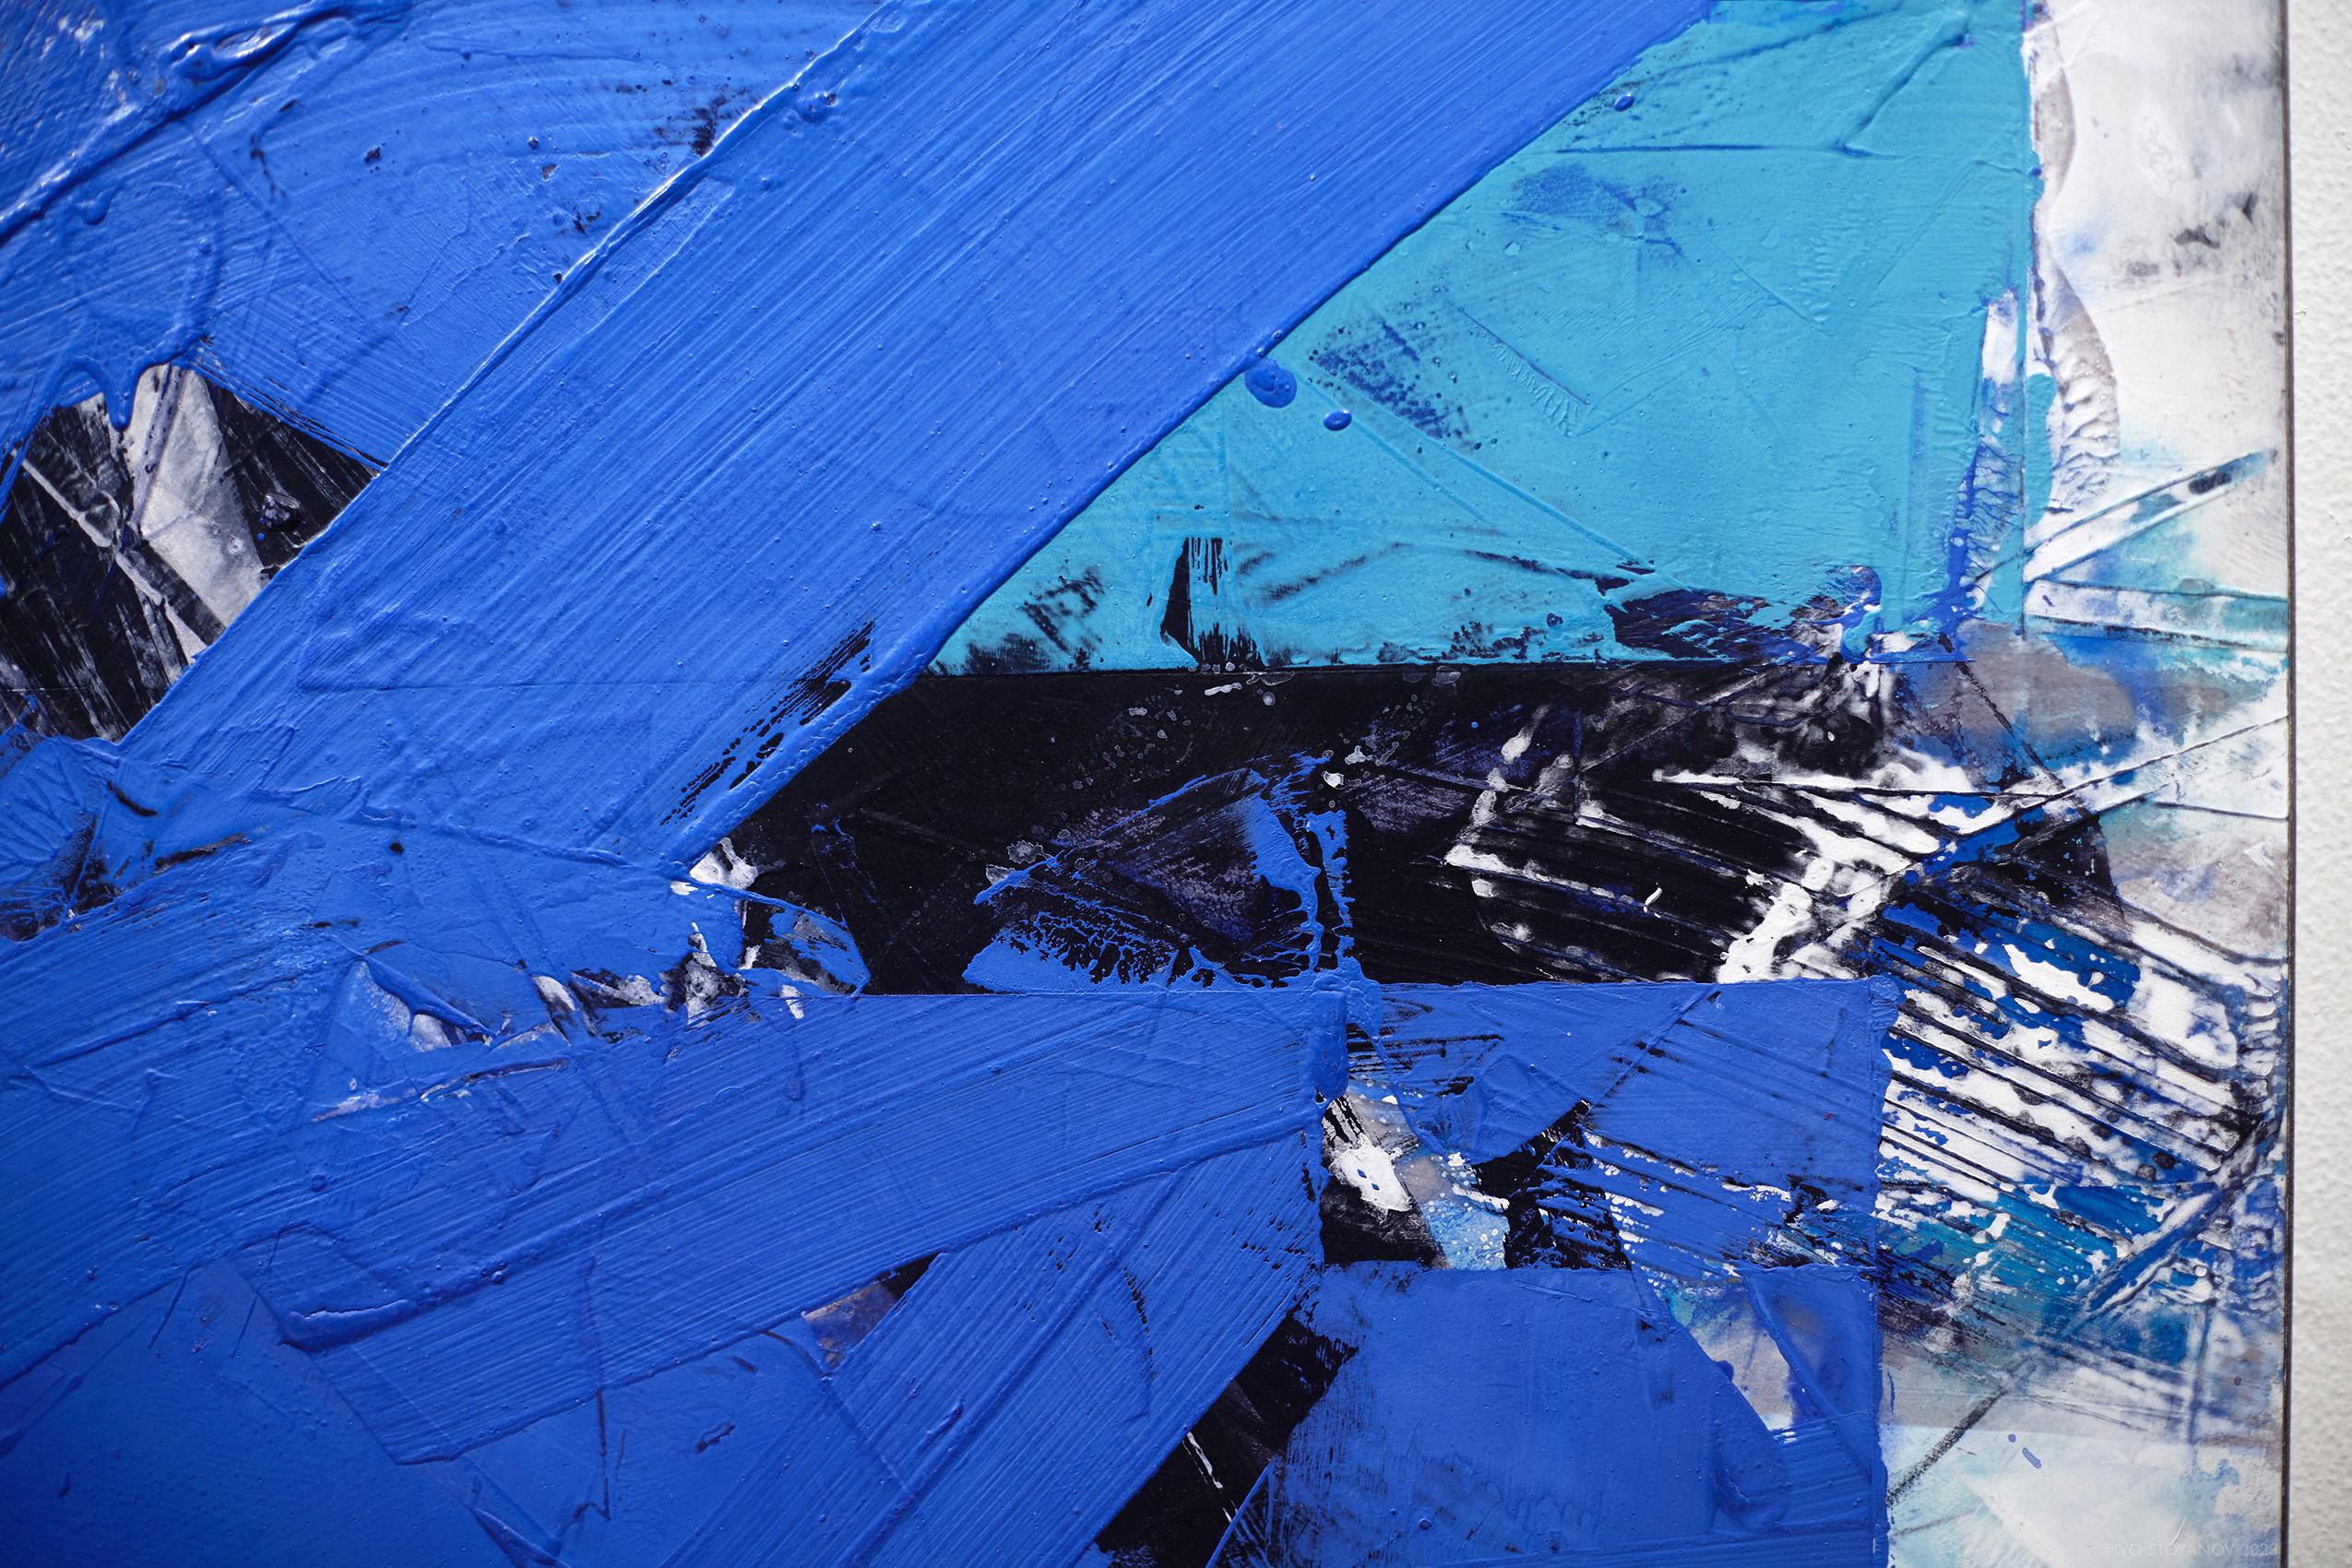 Vivid, deep blue and abstract…this compelling acrylic and mixed media piece by Ivo Stoyanov illustrates his masterful use of expressive form, colour and texture. The Canadian artist is known for creating intensely dynamic paintings inspired by